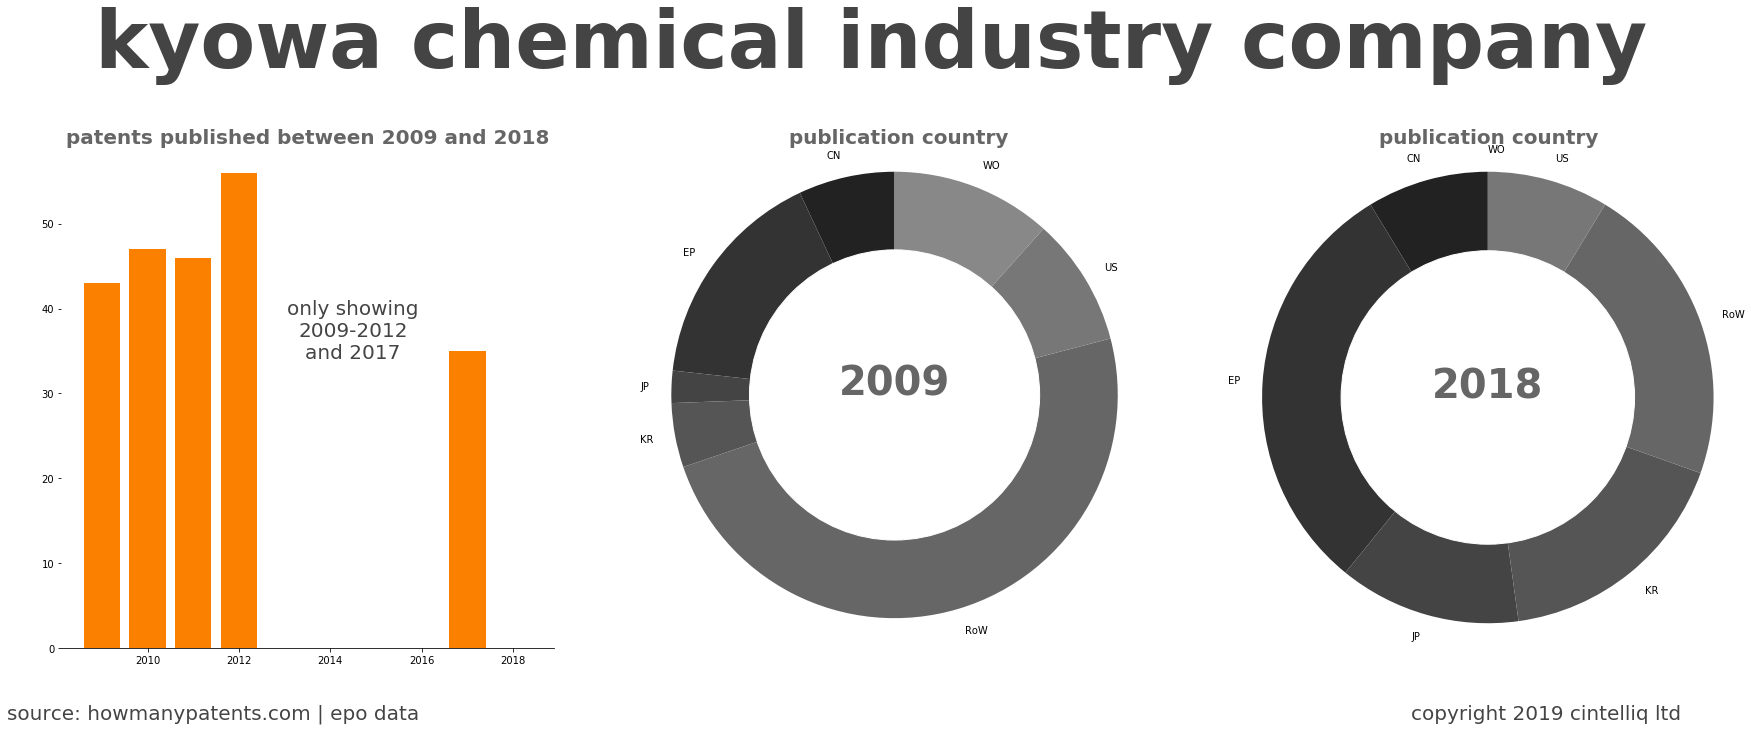 summary of patents for Kyowa Chemical Industry Company